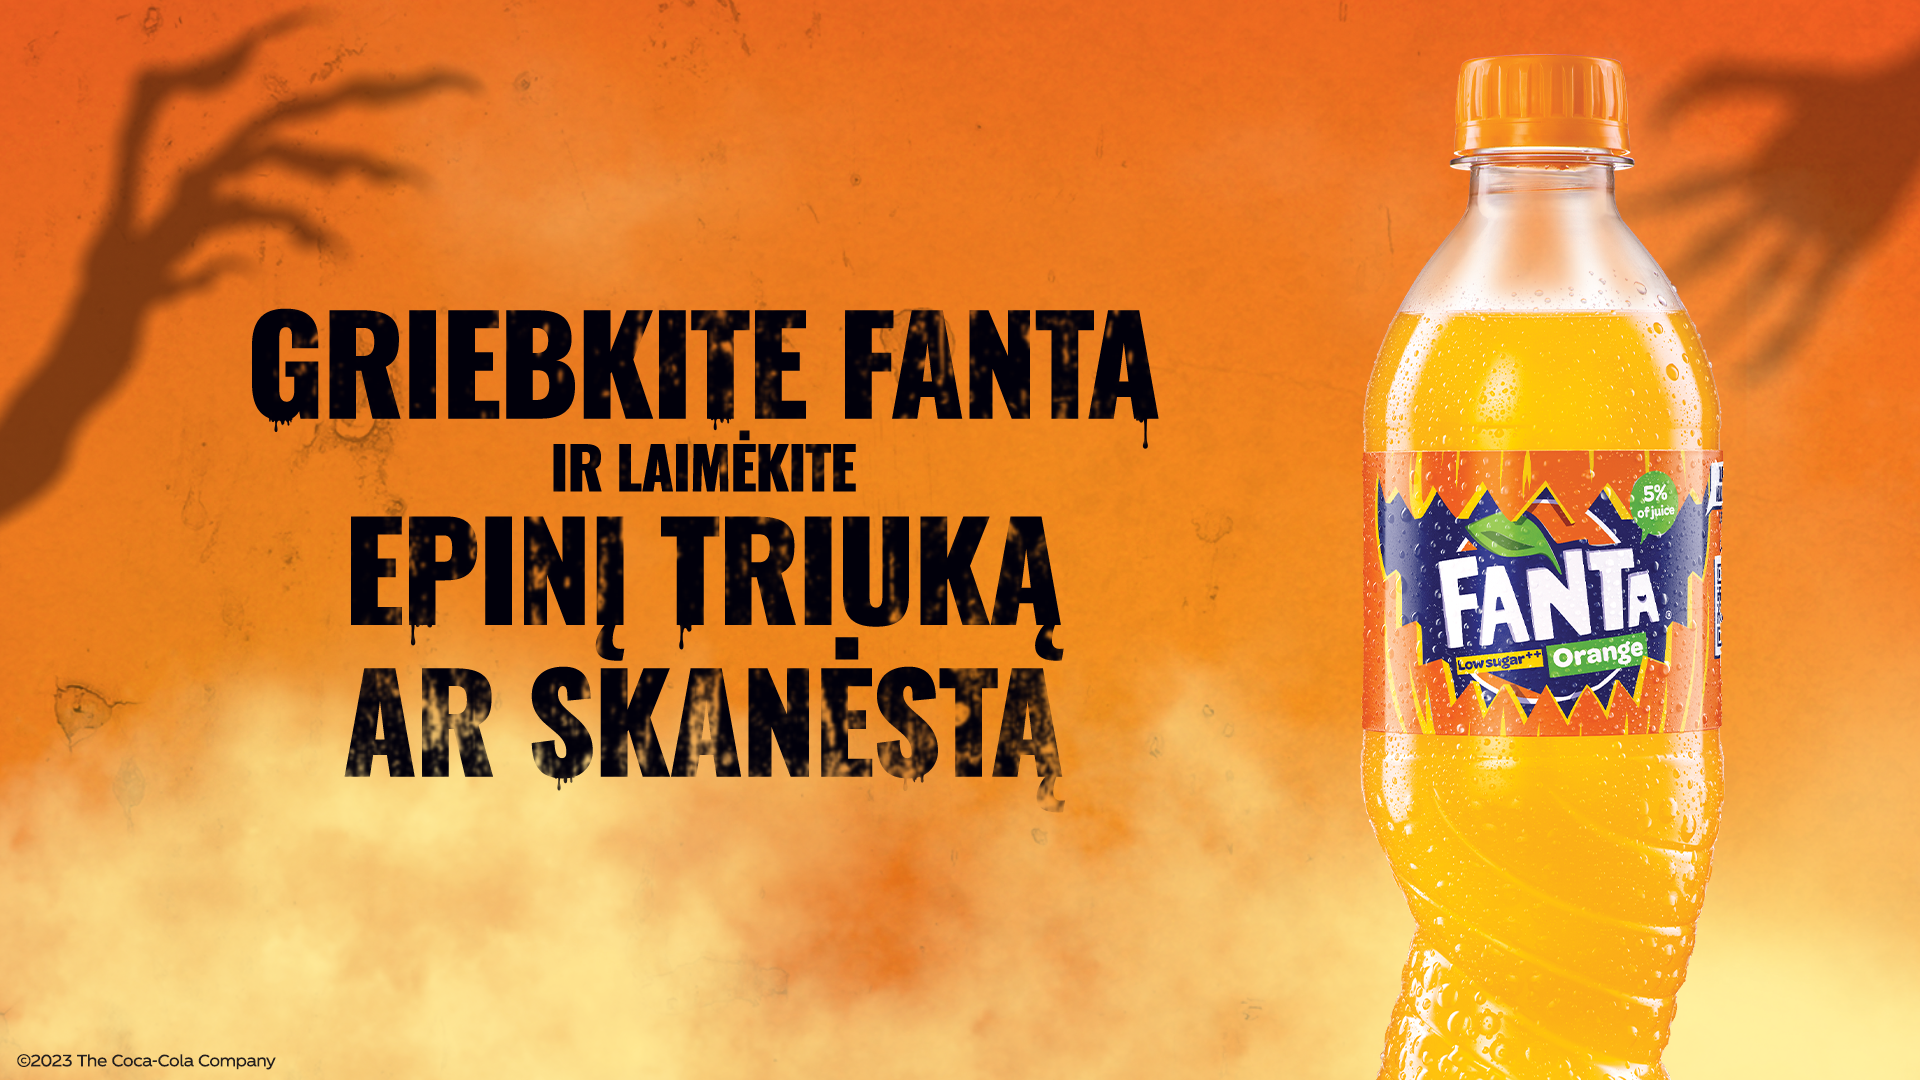 Bottle of Fanta with scary image and text to grab a Fanta to win epic tricks or treats